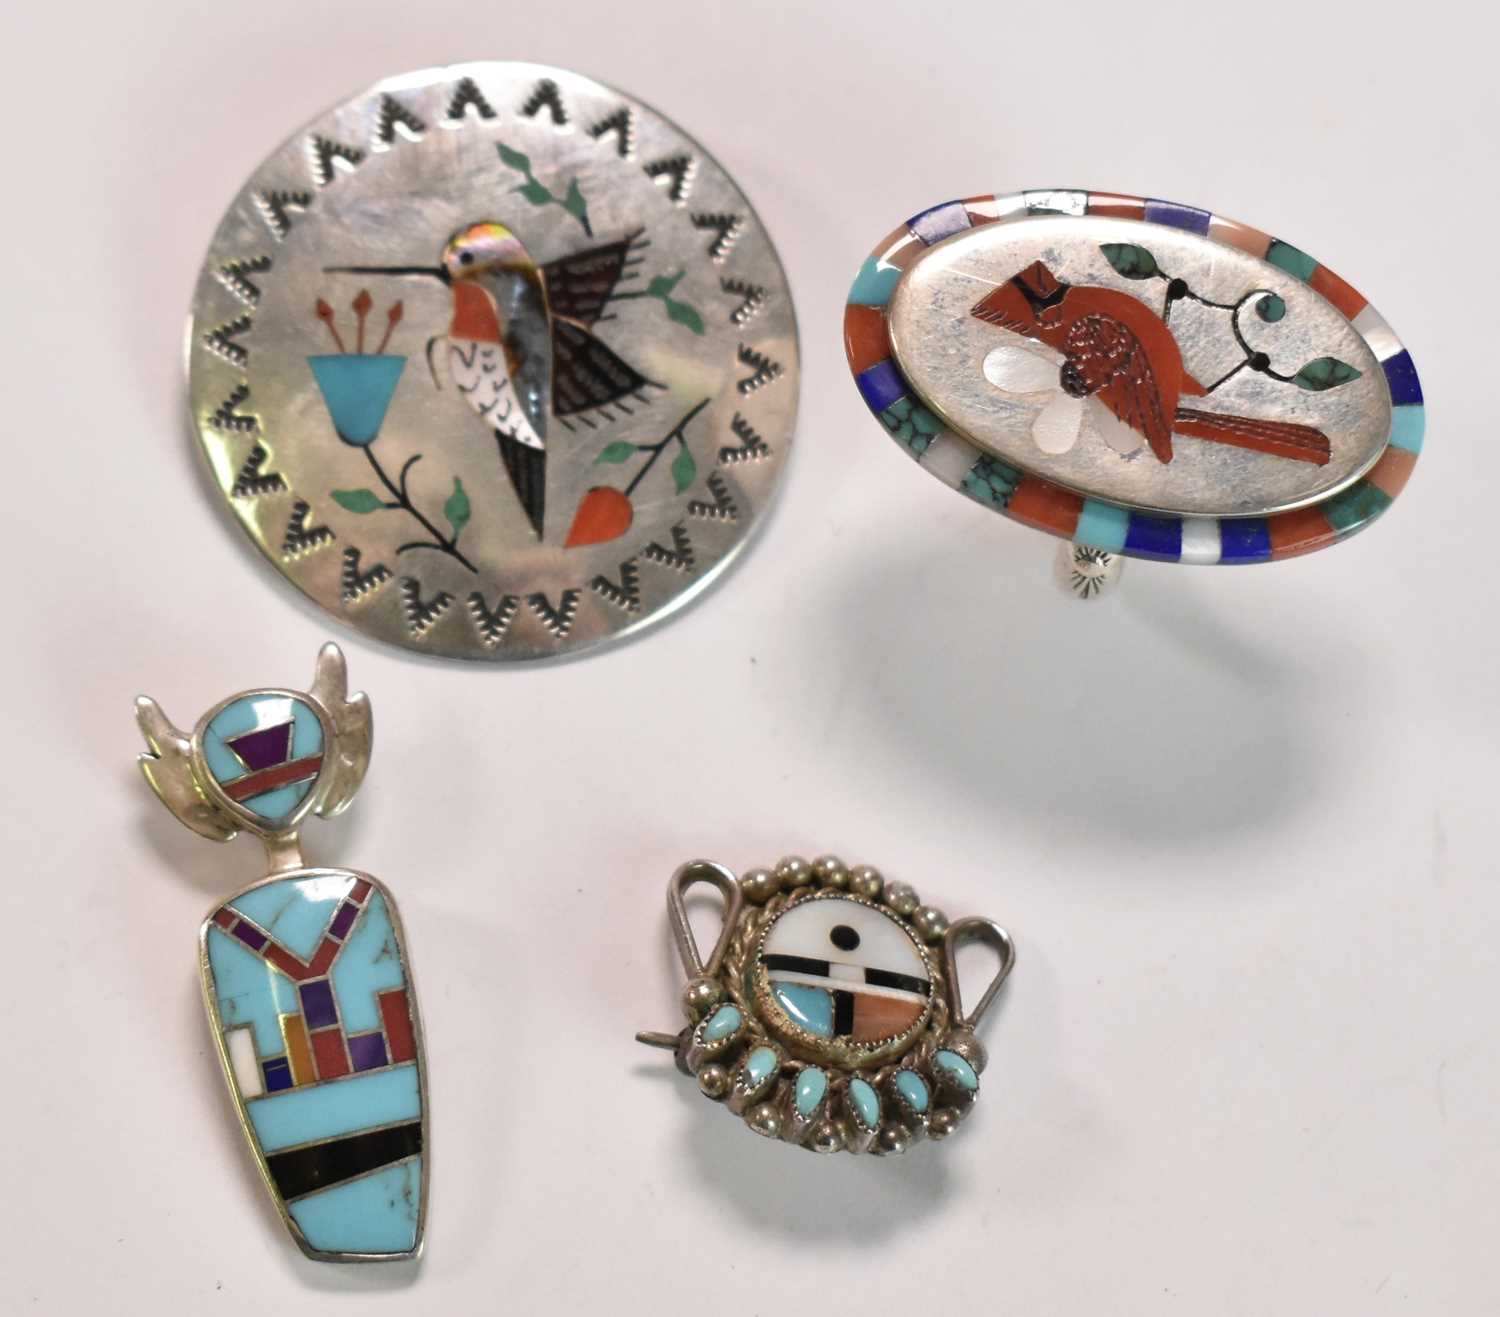 NAVAJO/NATIVE AMERICAN; a sterling silver and polished stone inset circular brooch depicting a bird,